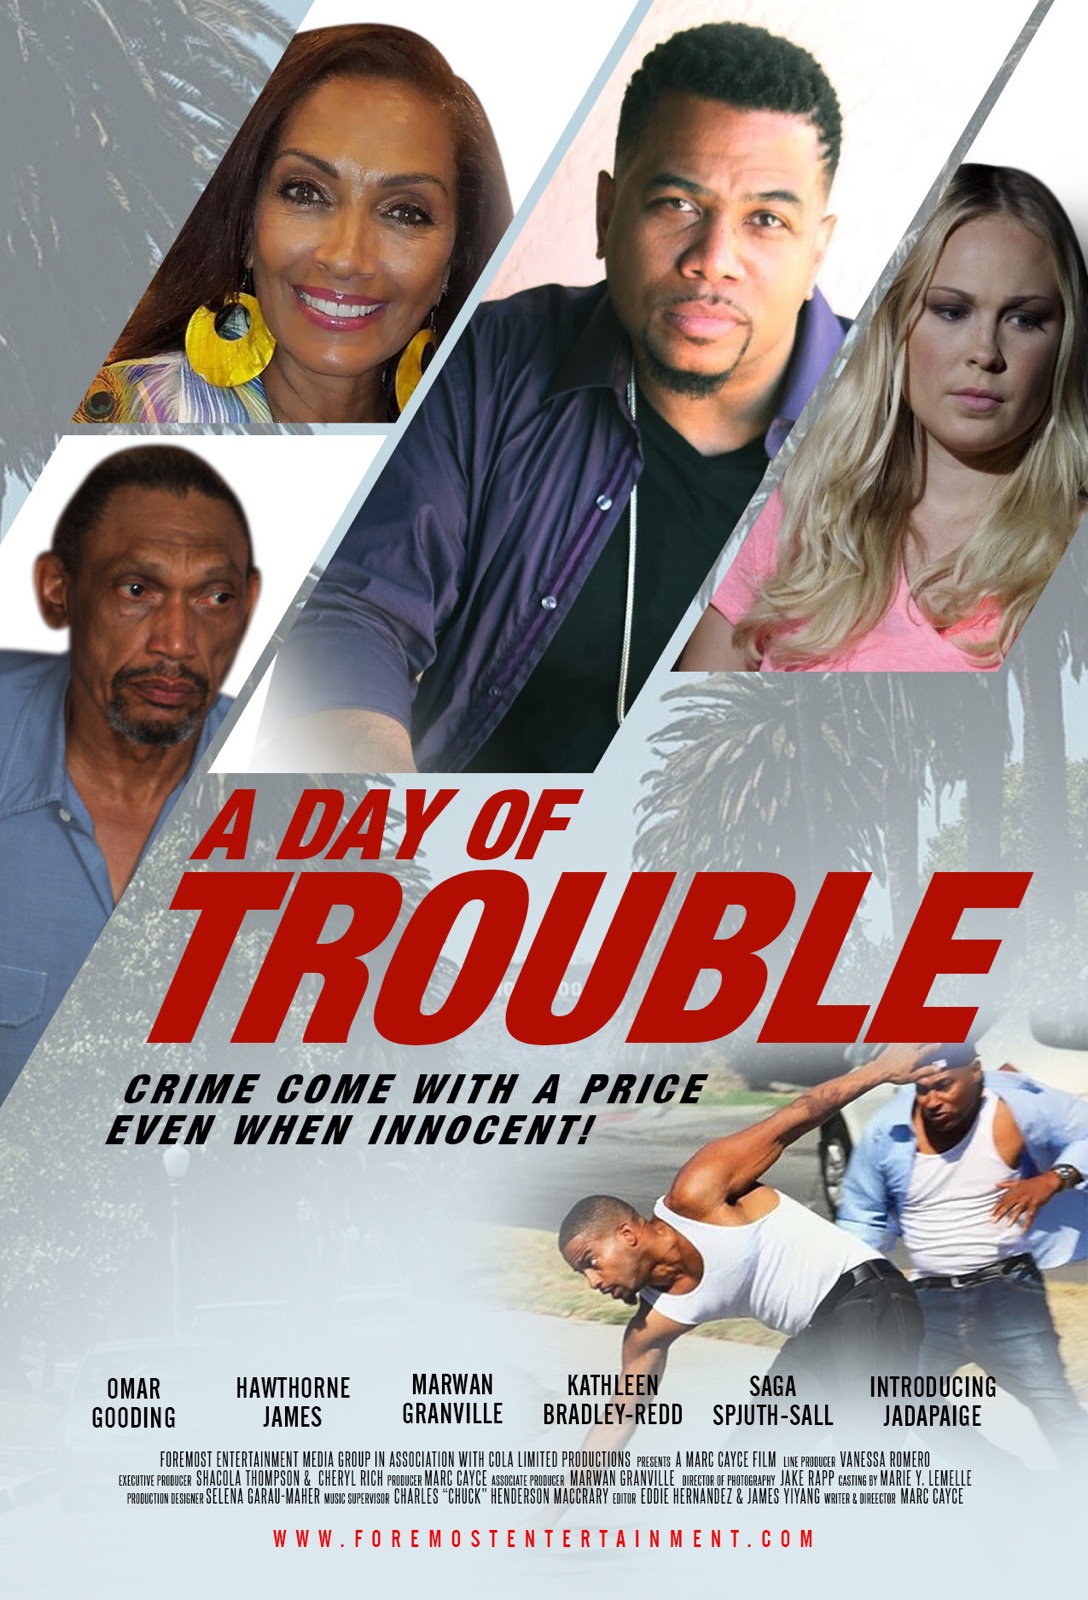 A Day of Trouble